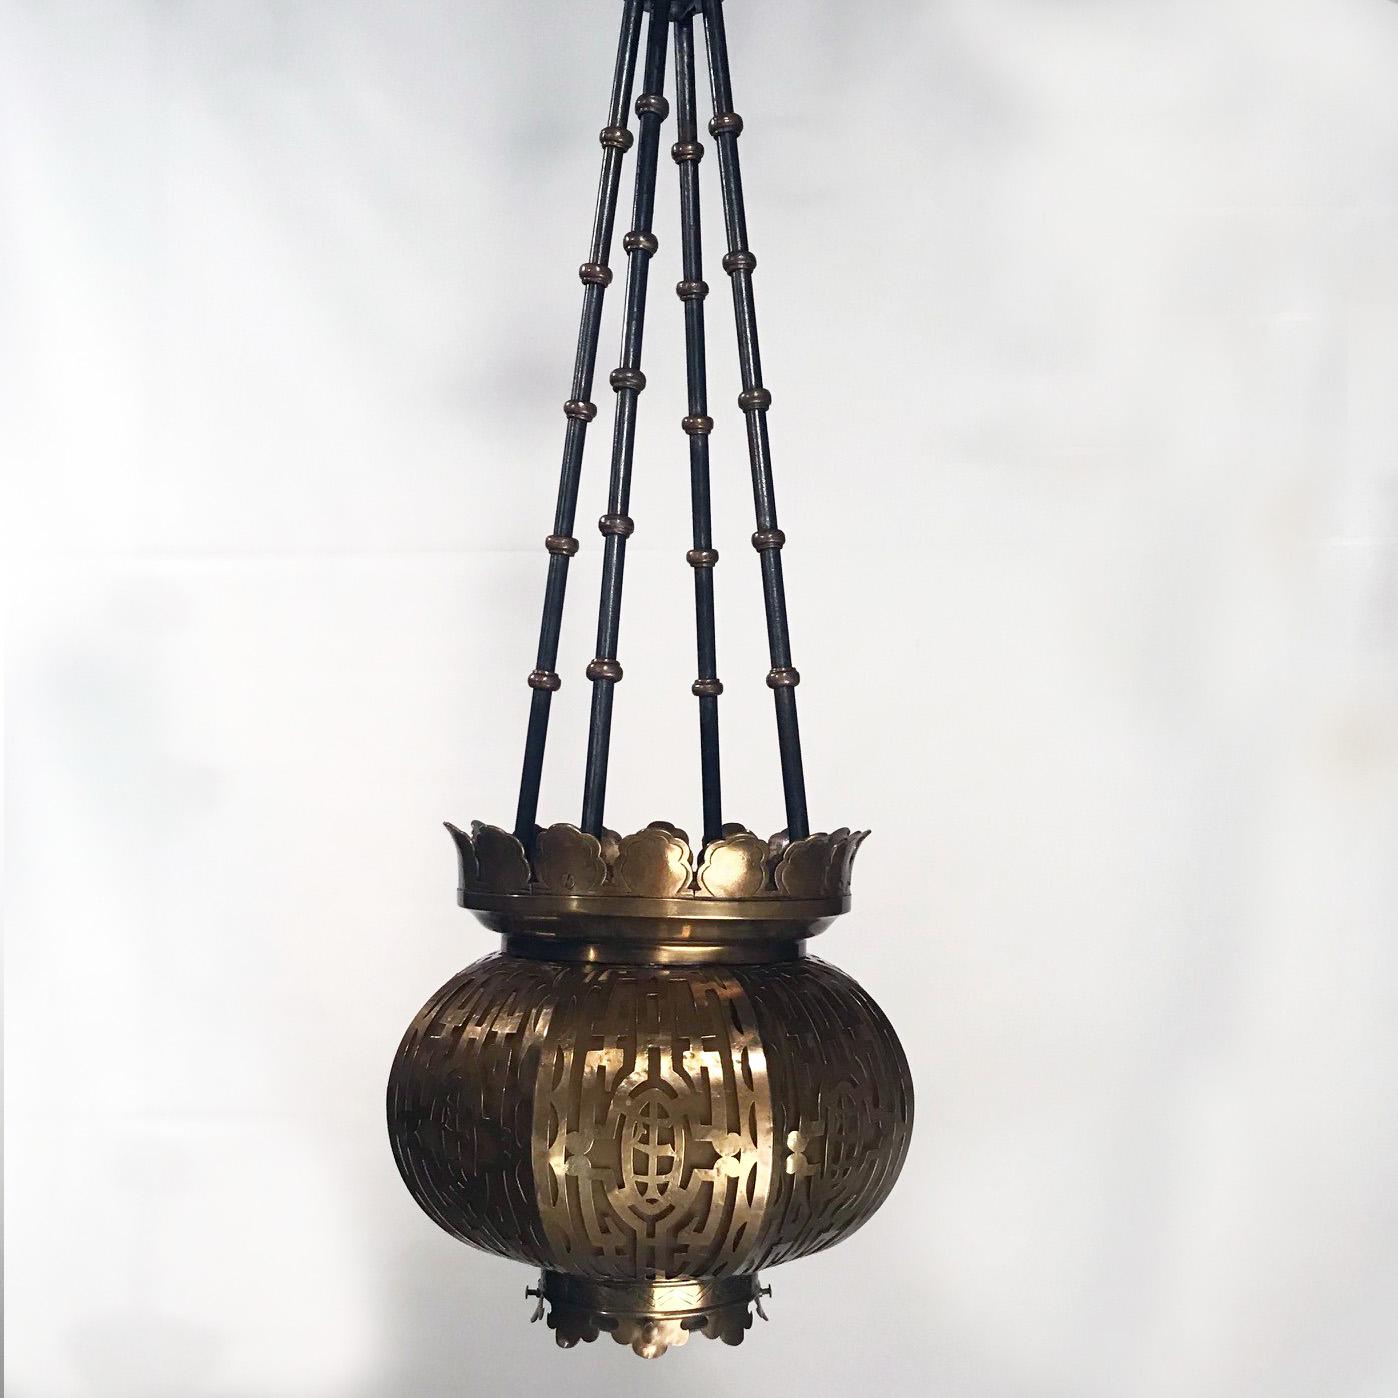 Antique brass oriental themed lantern, the compressed spherical body pierced with stylized designs, the crown and base modeled with leaves, with amber glass liner panels.